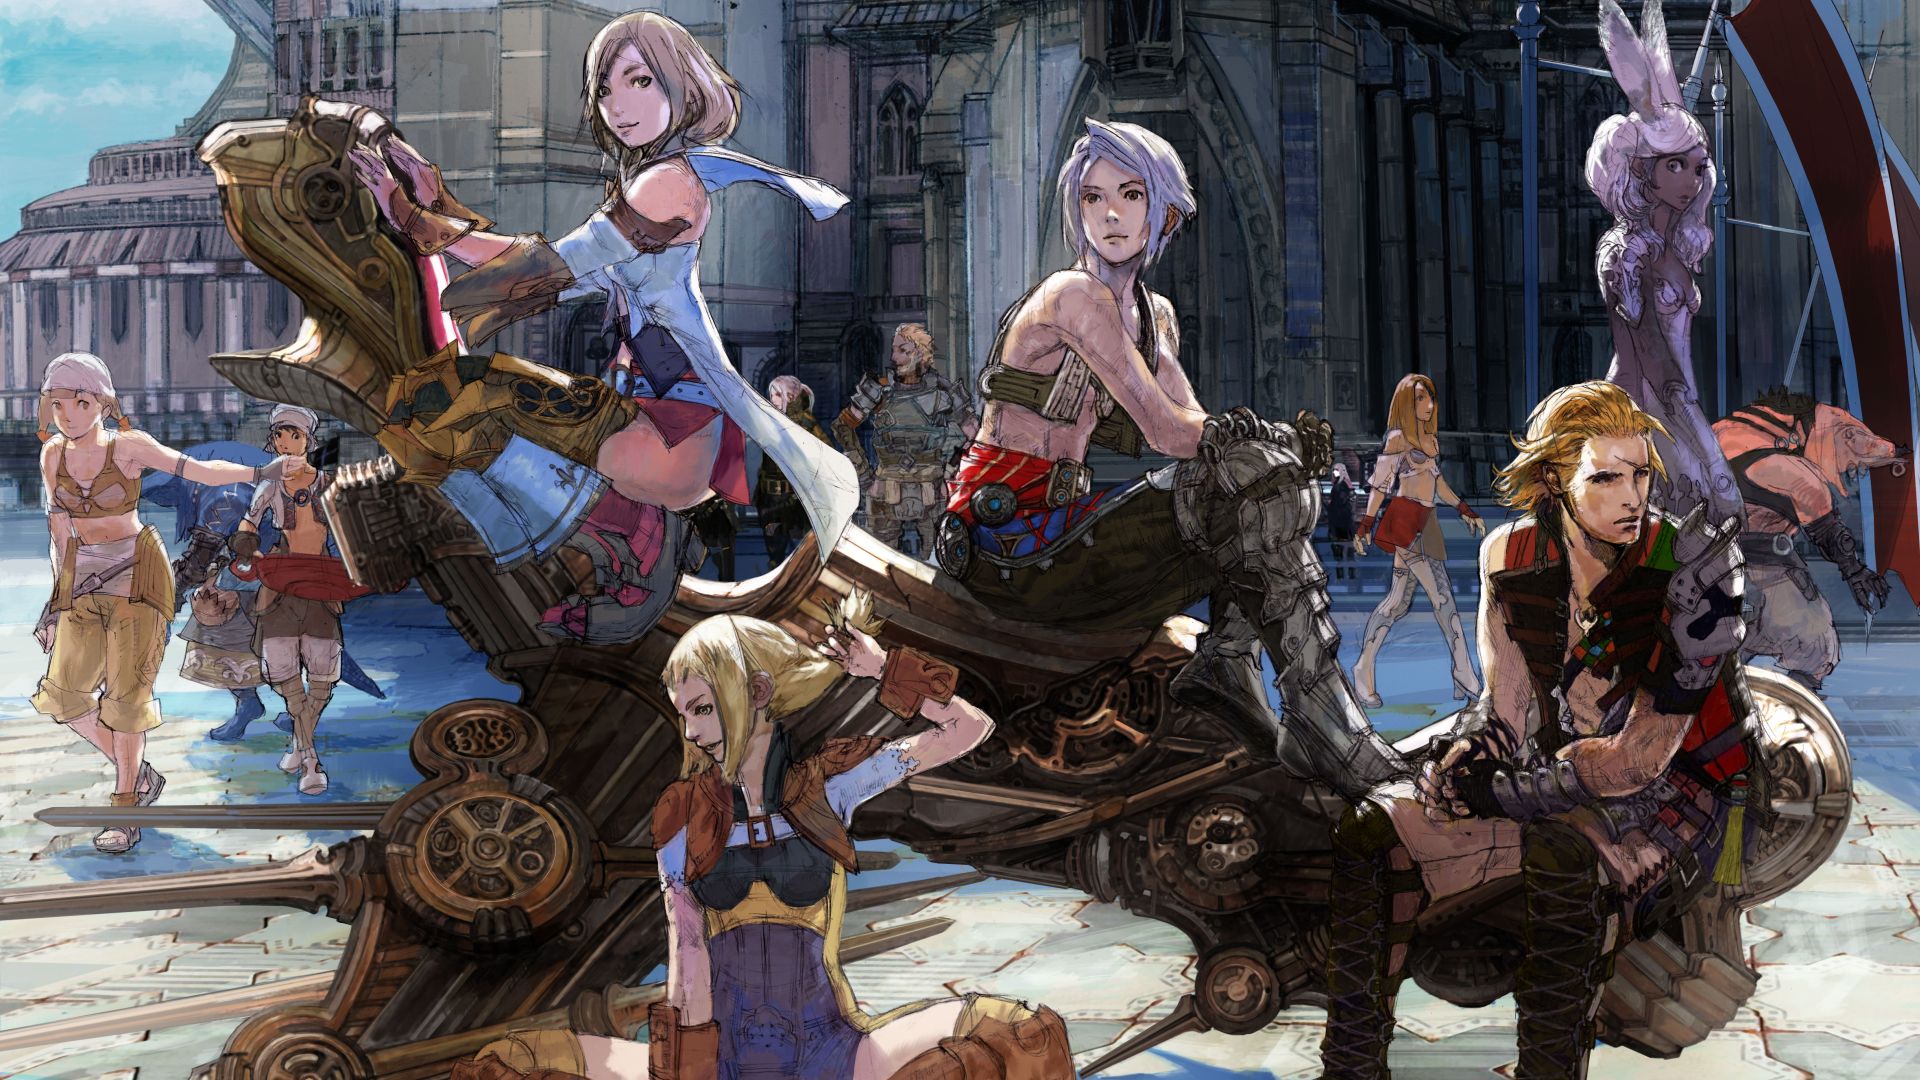 Final Fantasy 12 The Zodiac Age Final Fantasy X X 2 Hd Remaster Receive New Trailers For Xbox One And Switch